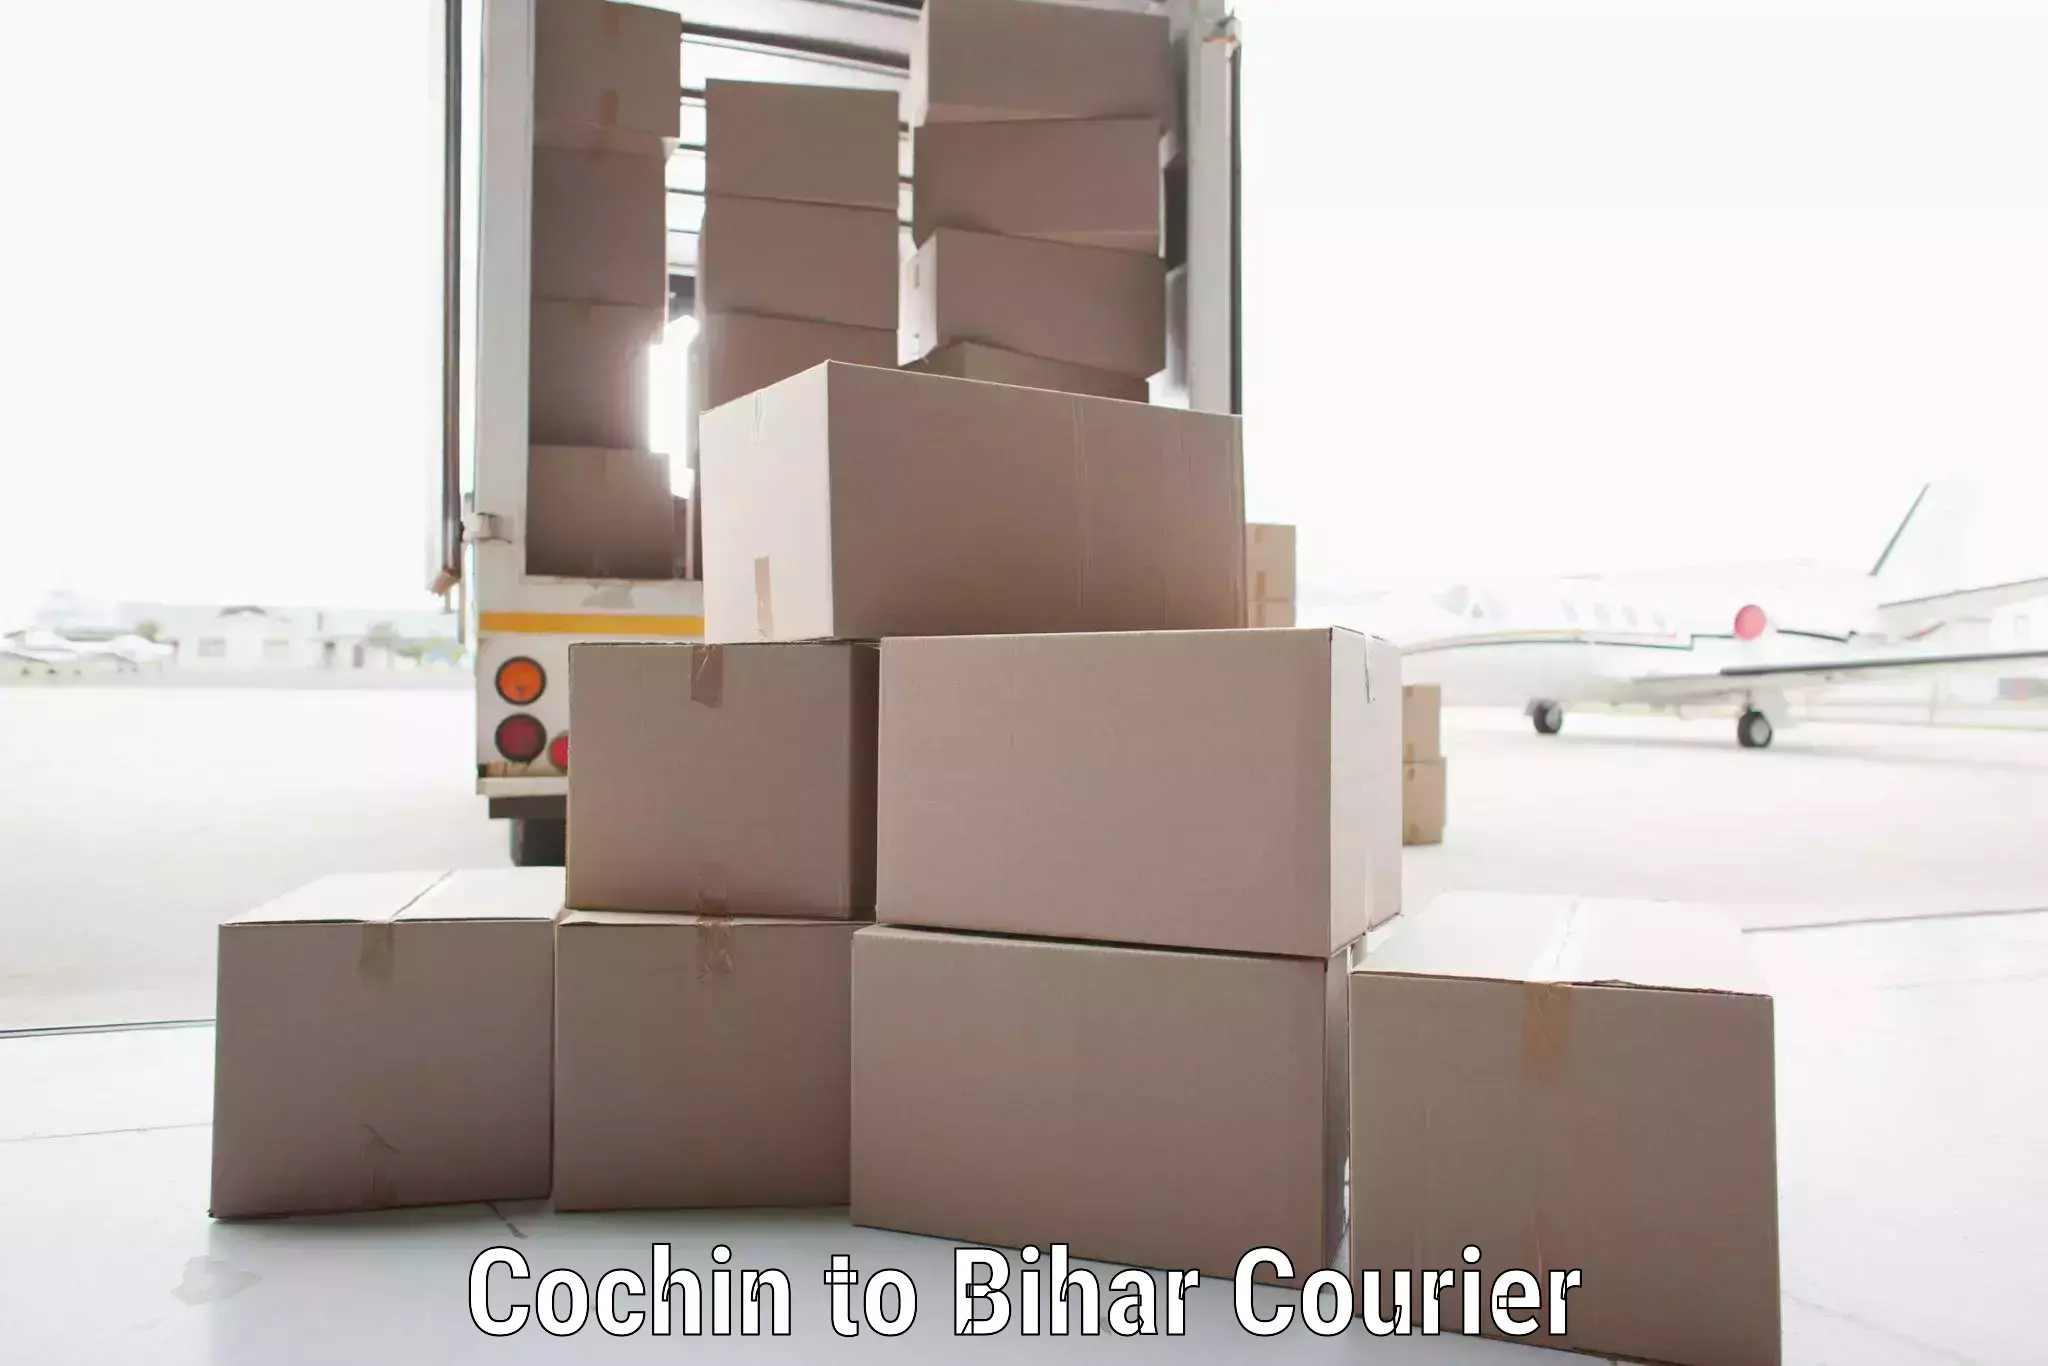 Nationwide courier service Cochin to Bihar